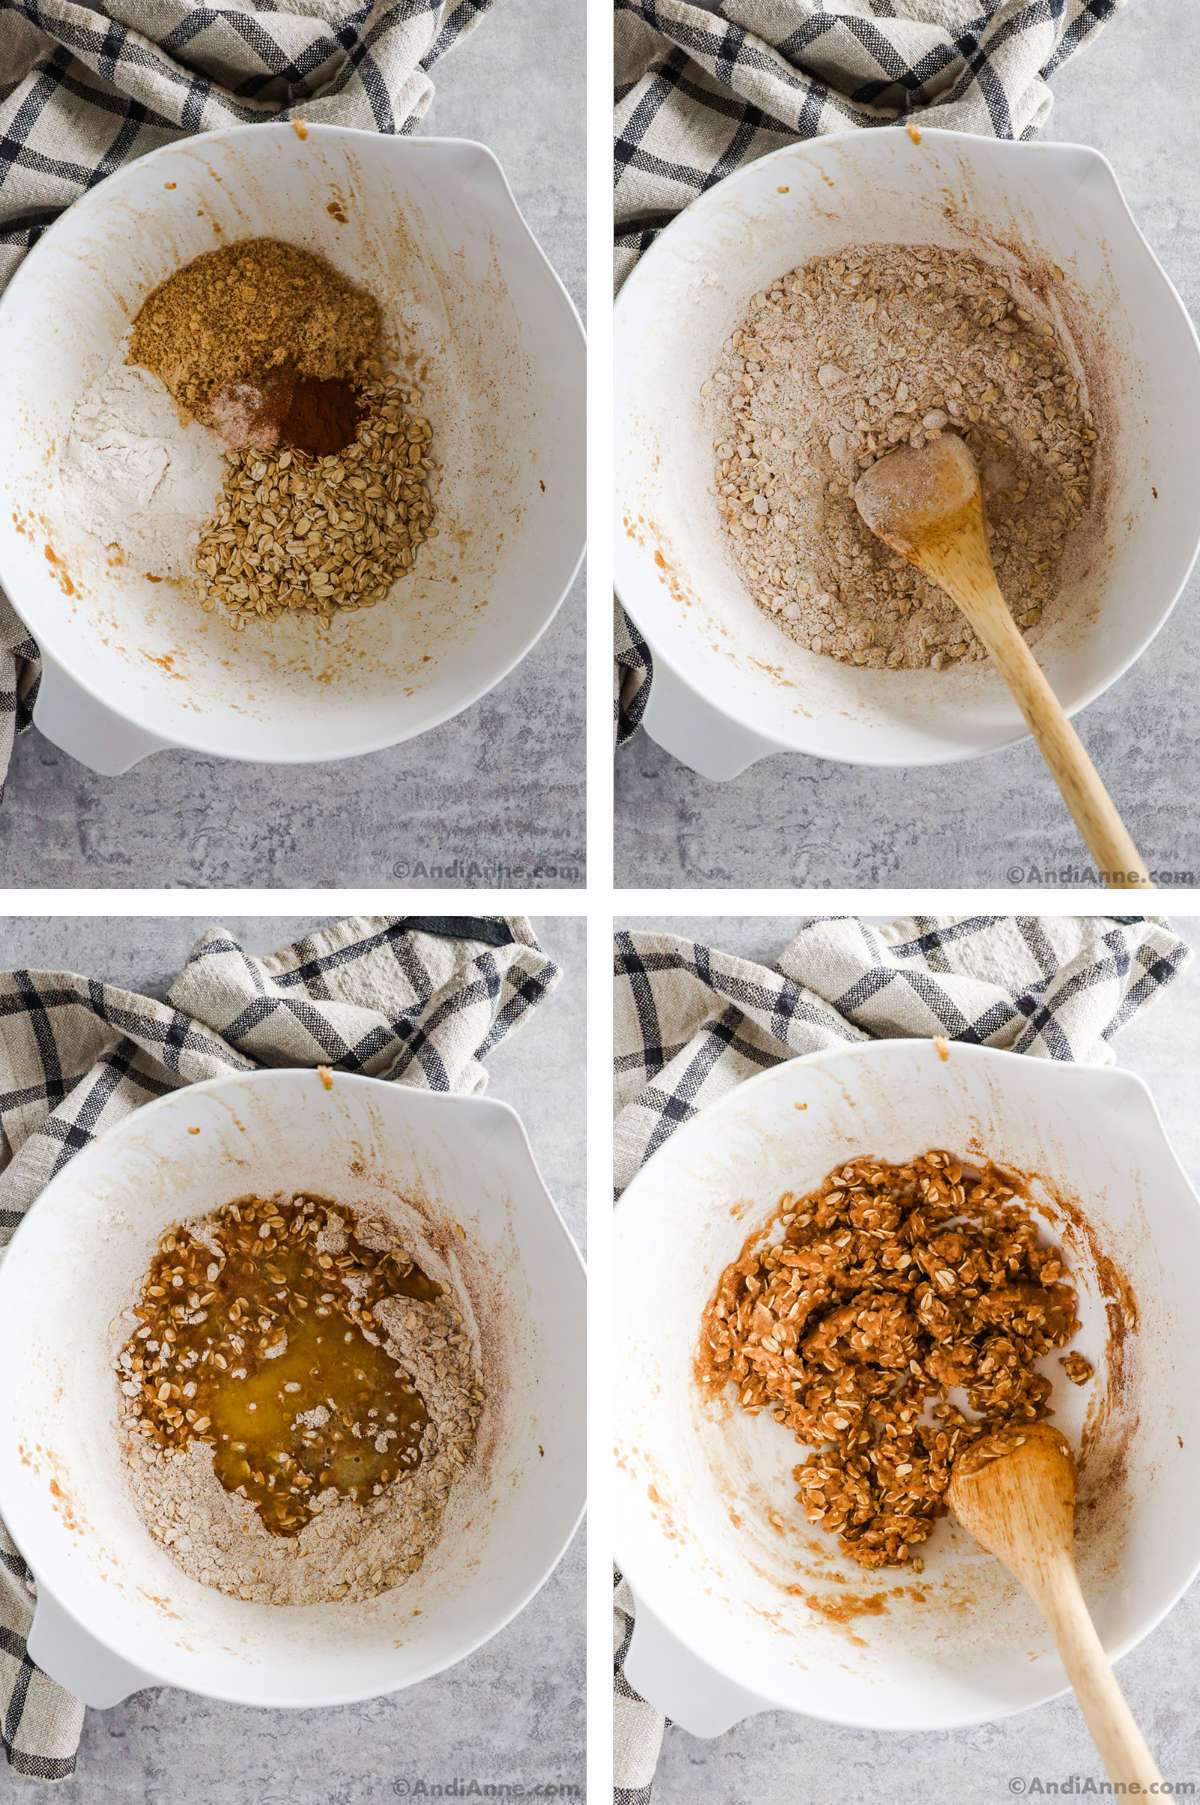 Four overhead images in one: 1. In a separate white bowl all the dry ingredients are added. 2. All the dry ingredients in the bowl are mixed. 3. Melted butter is added to the mixture. 4. Melted butter is mixed with dry ingredients with a wooden spoon. 